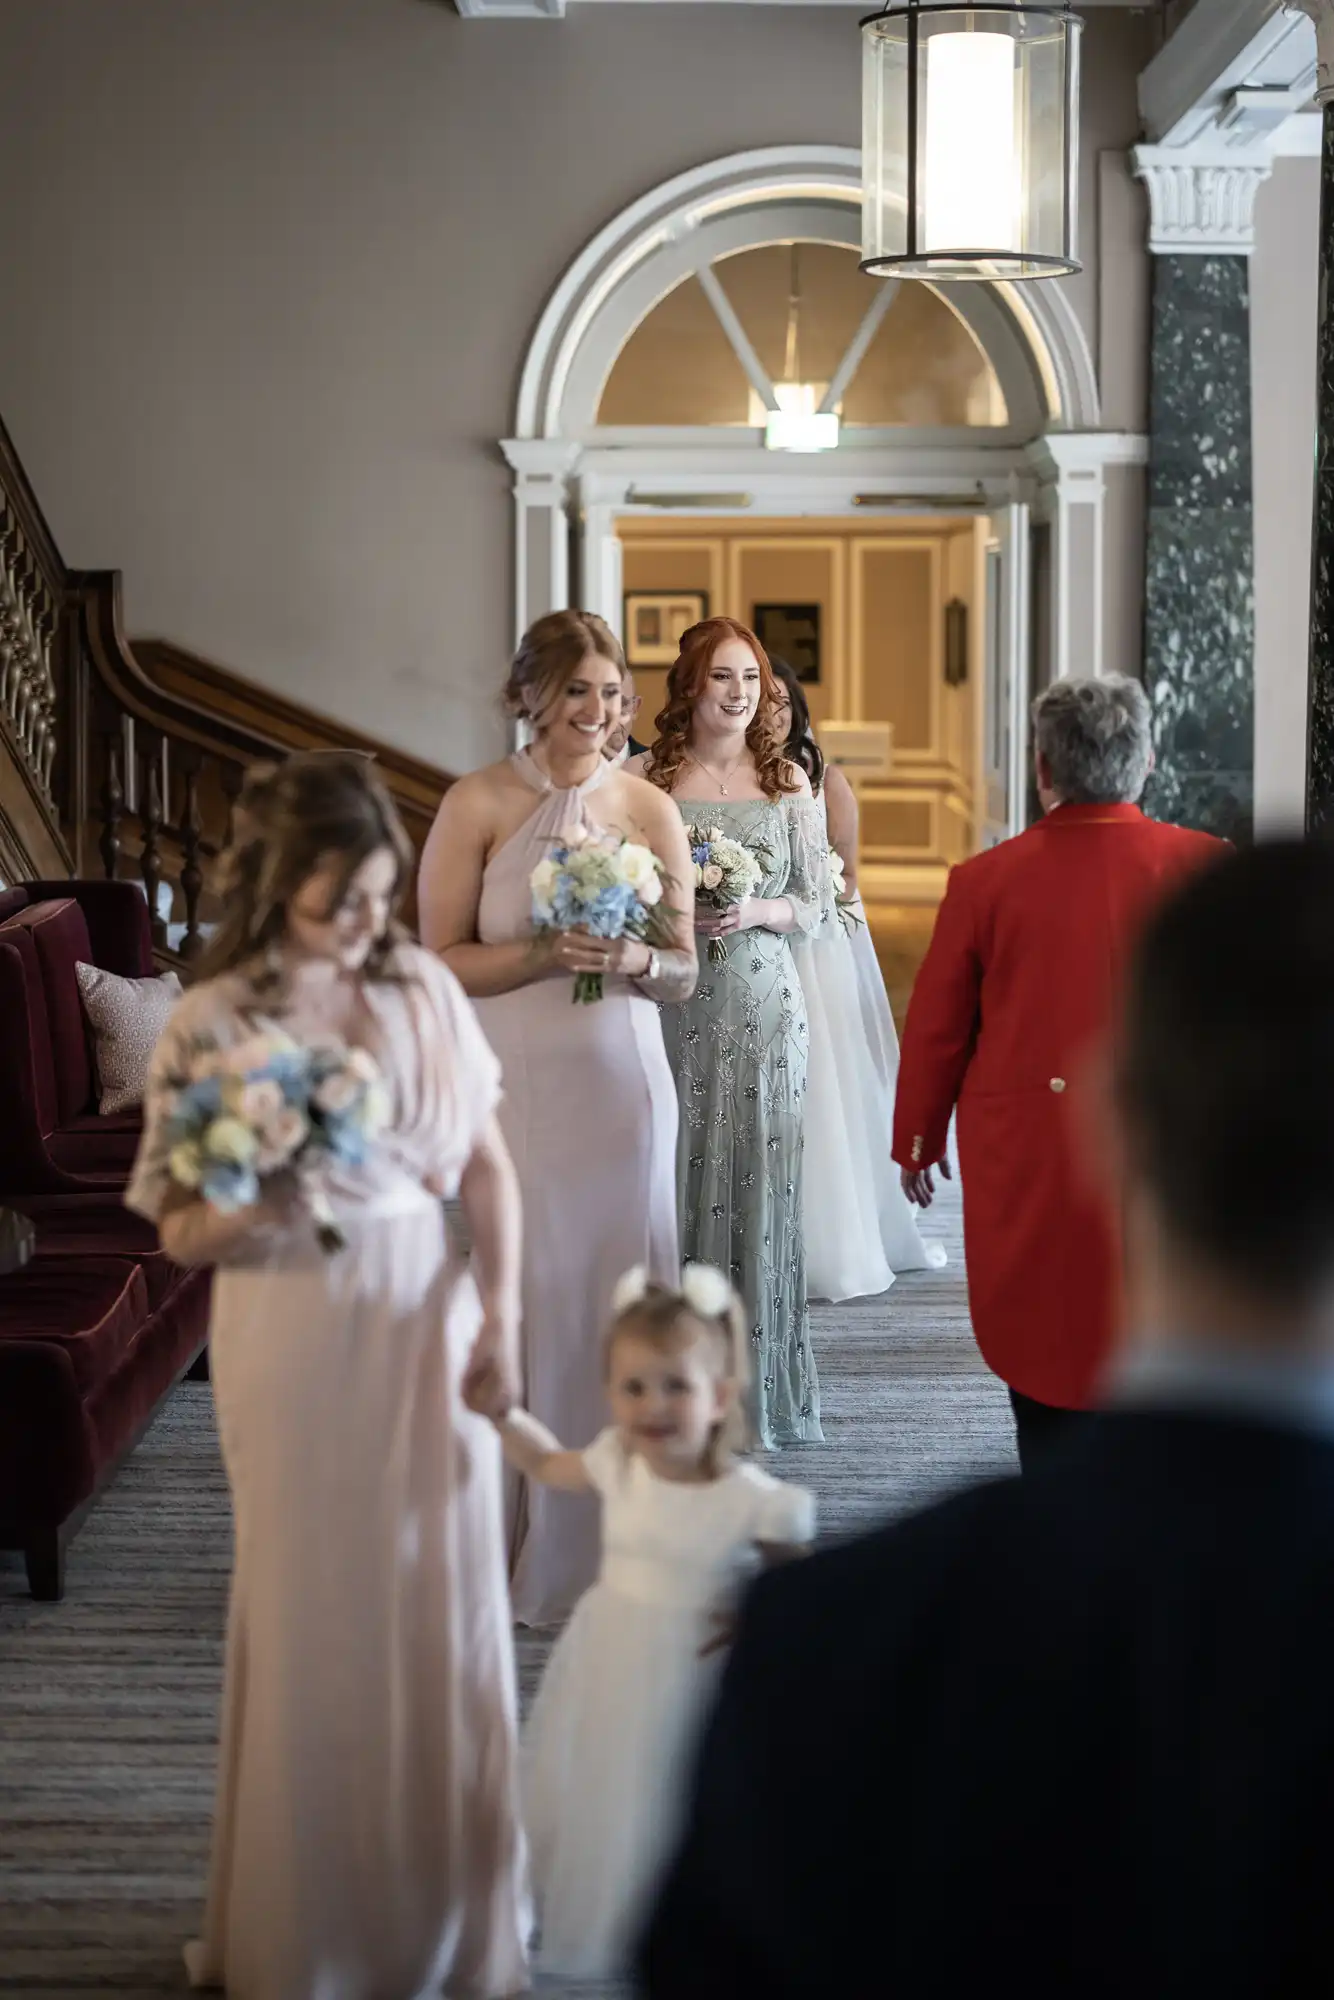 A wedding procession in an elegant hallway with a toddler leading, followed by women in formal dresses holding bouquets.